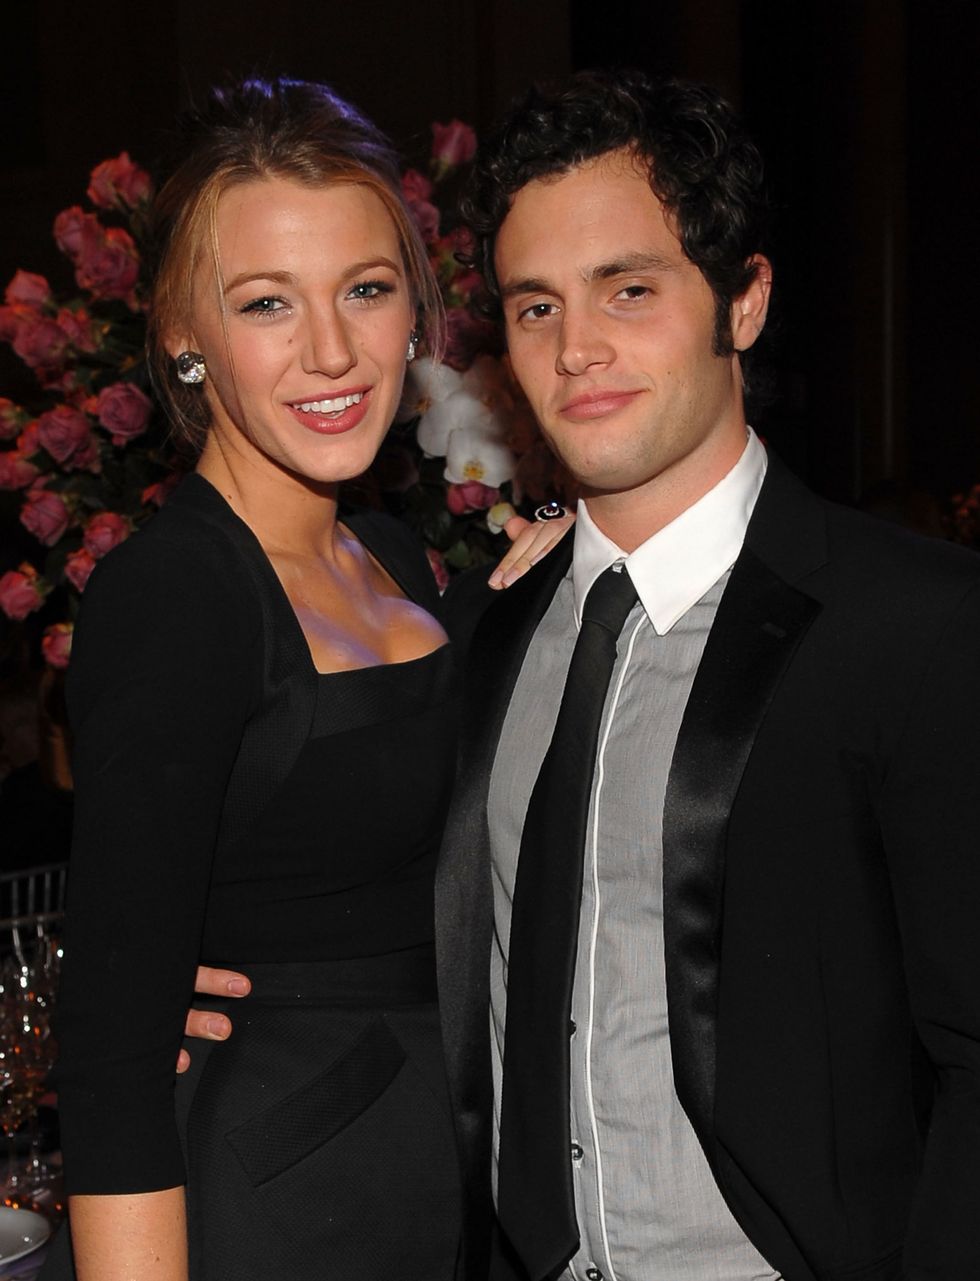 Blake Lively Was Both The Best And Worst Onscreen Kiss Penn Badgley Ever Had